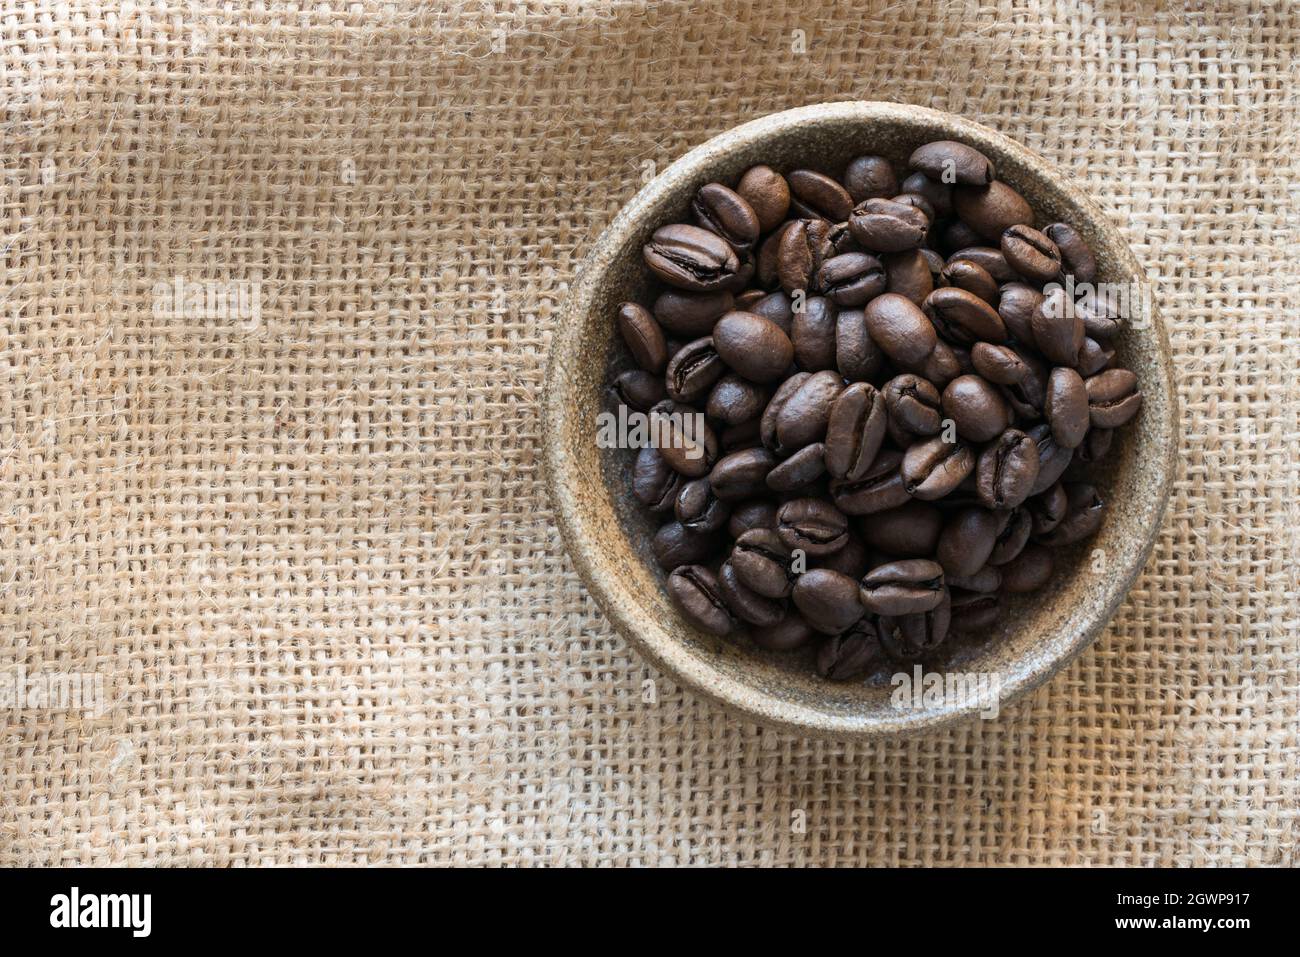 Coffee Beans In A Bowl Stock Photo